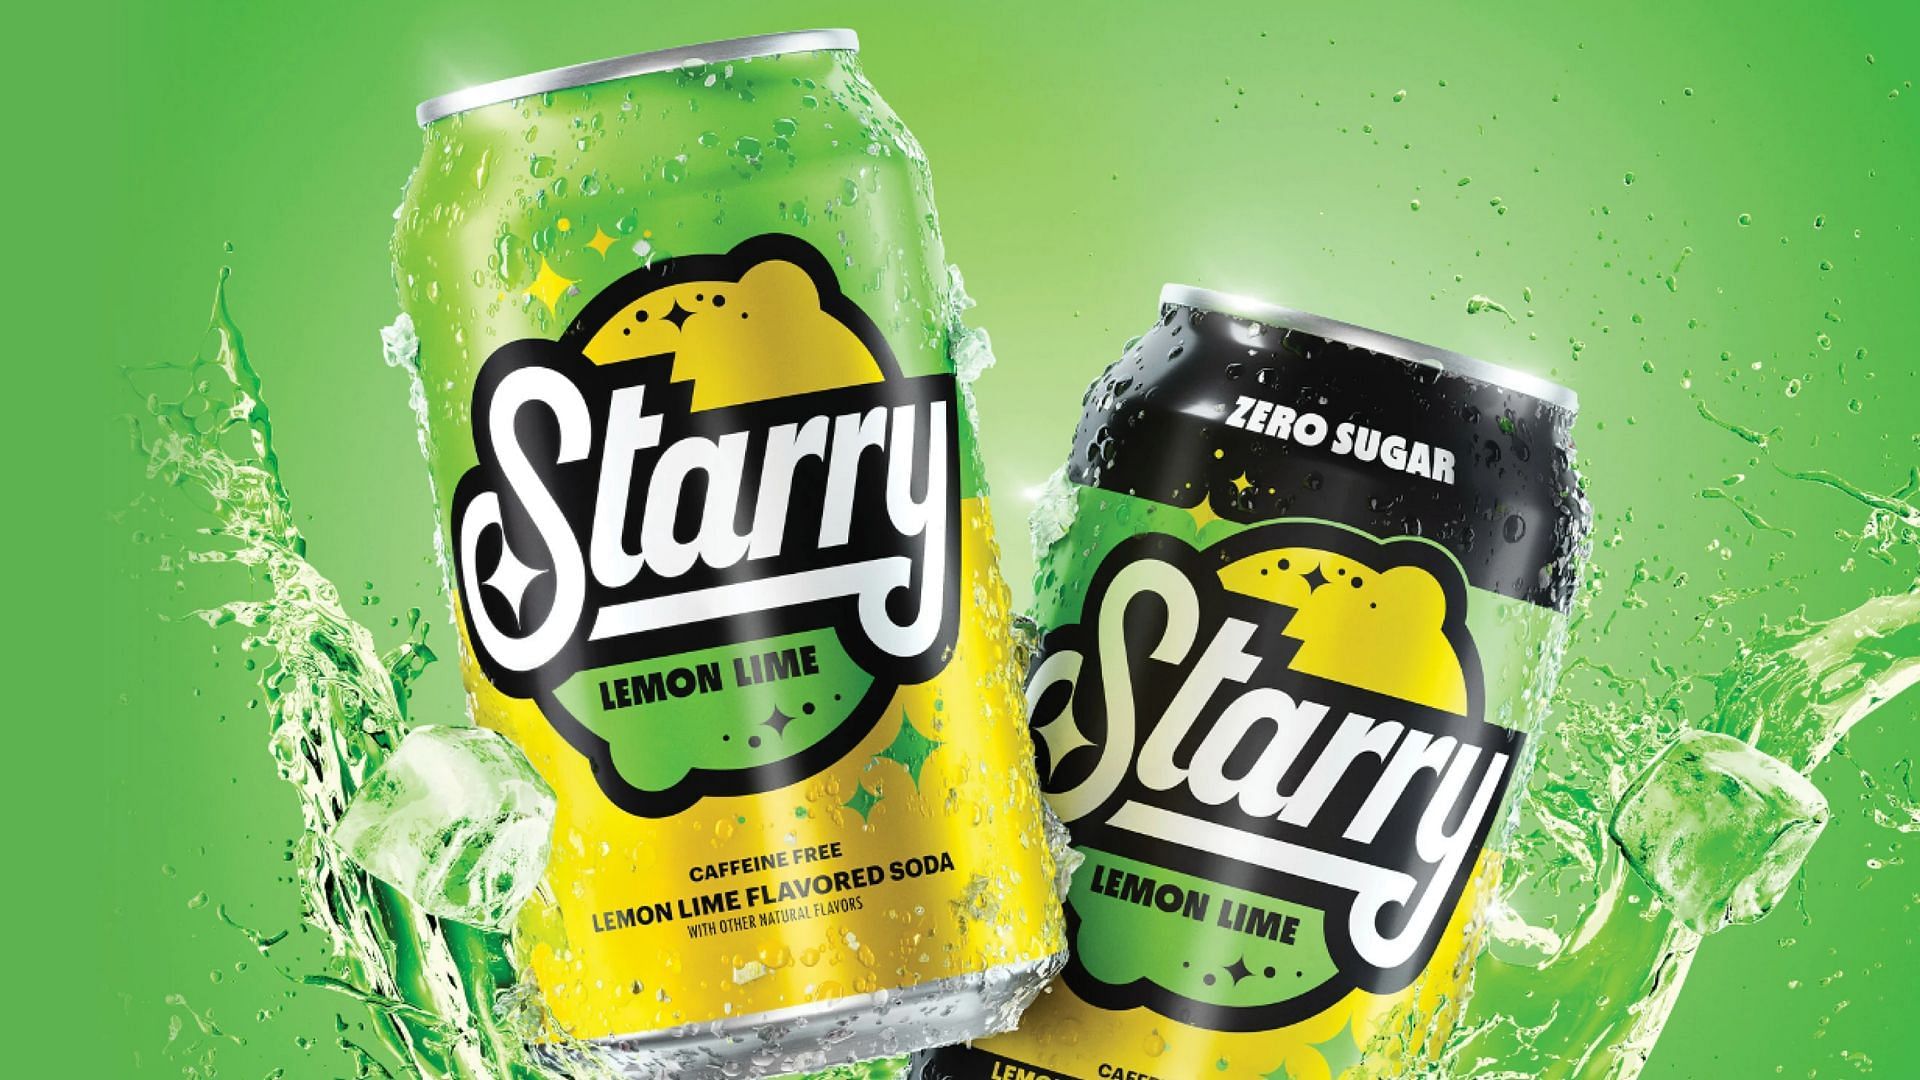 The new Starry feature a similar yet new and refreshing flavor profile to the discontinued Sierra Mist (Image via PepsiCo)